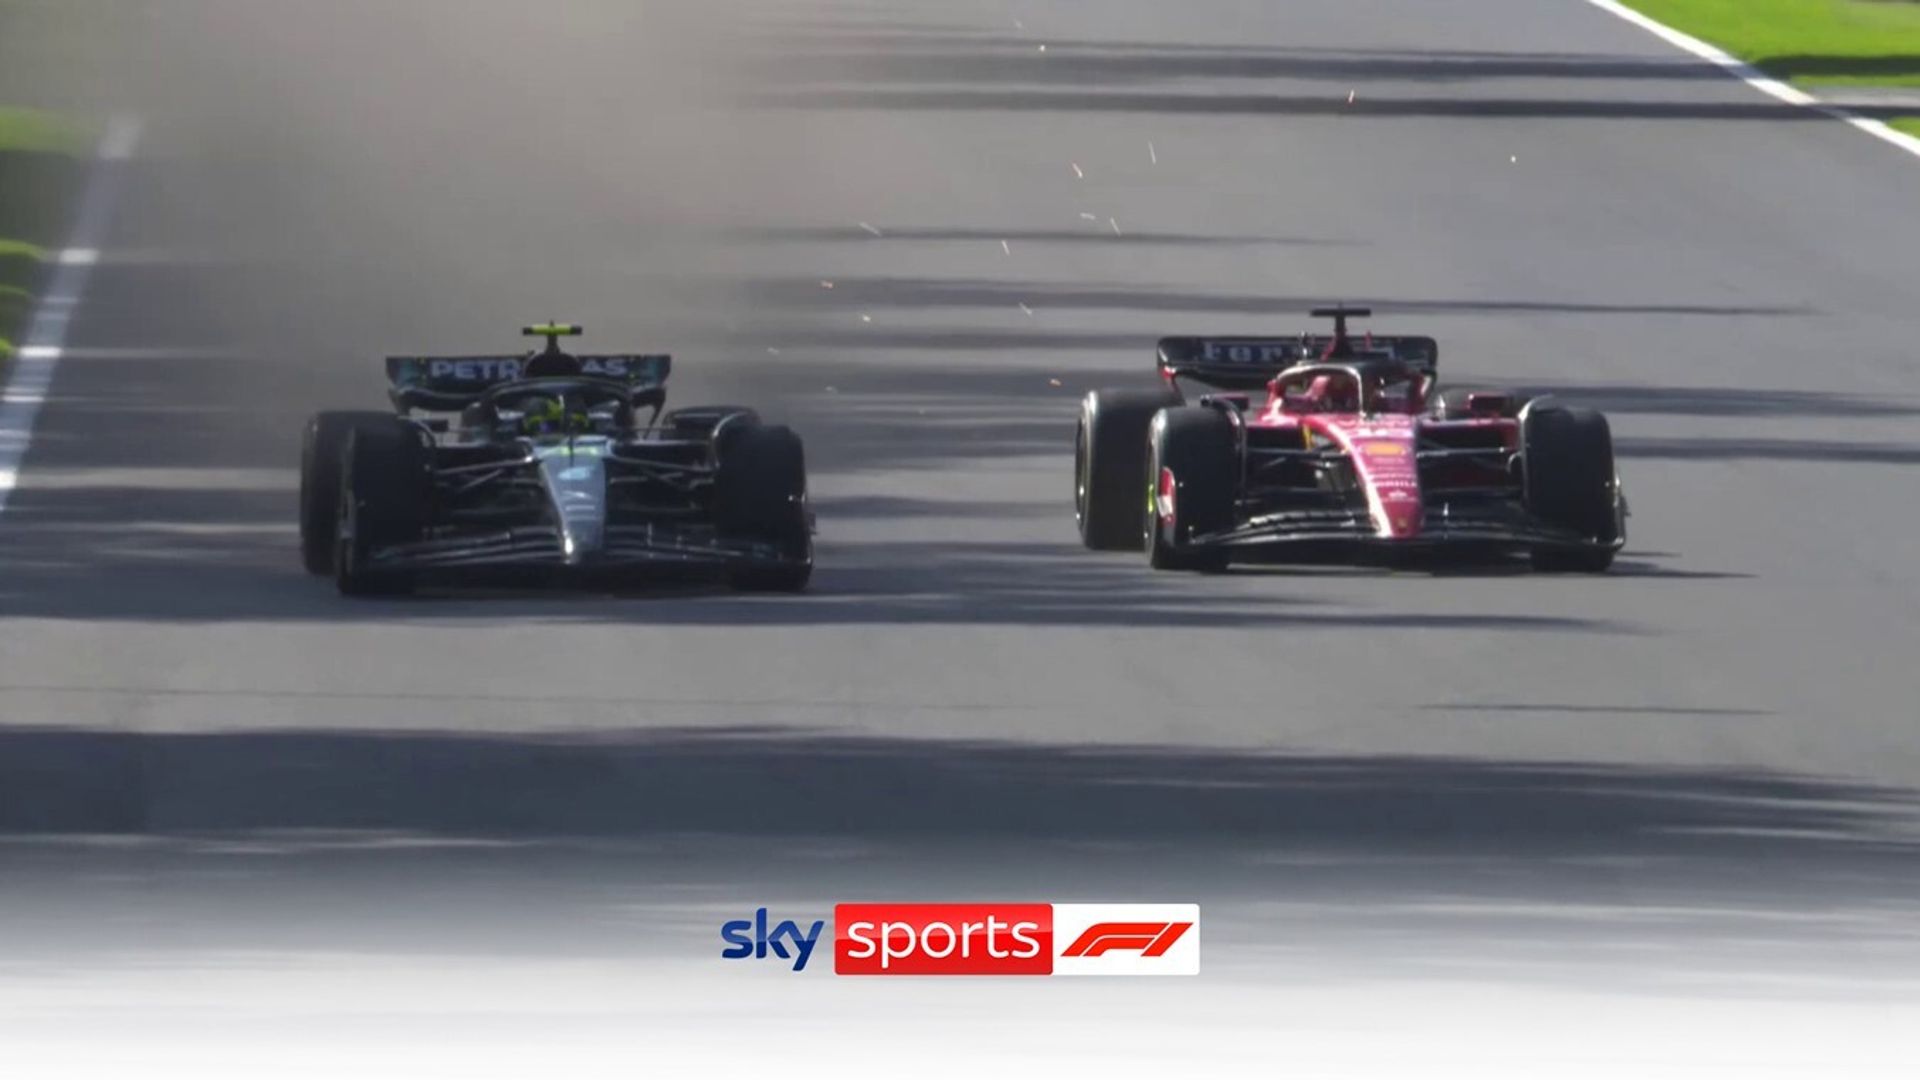 'That's very brave!' | Hamilton's bold overtake to take P2 from Leclerc